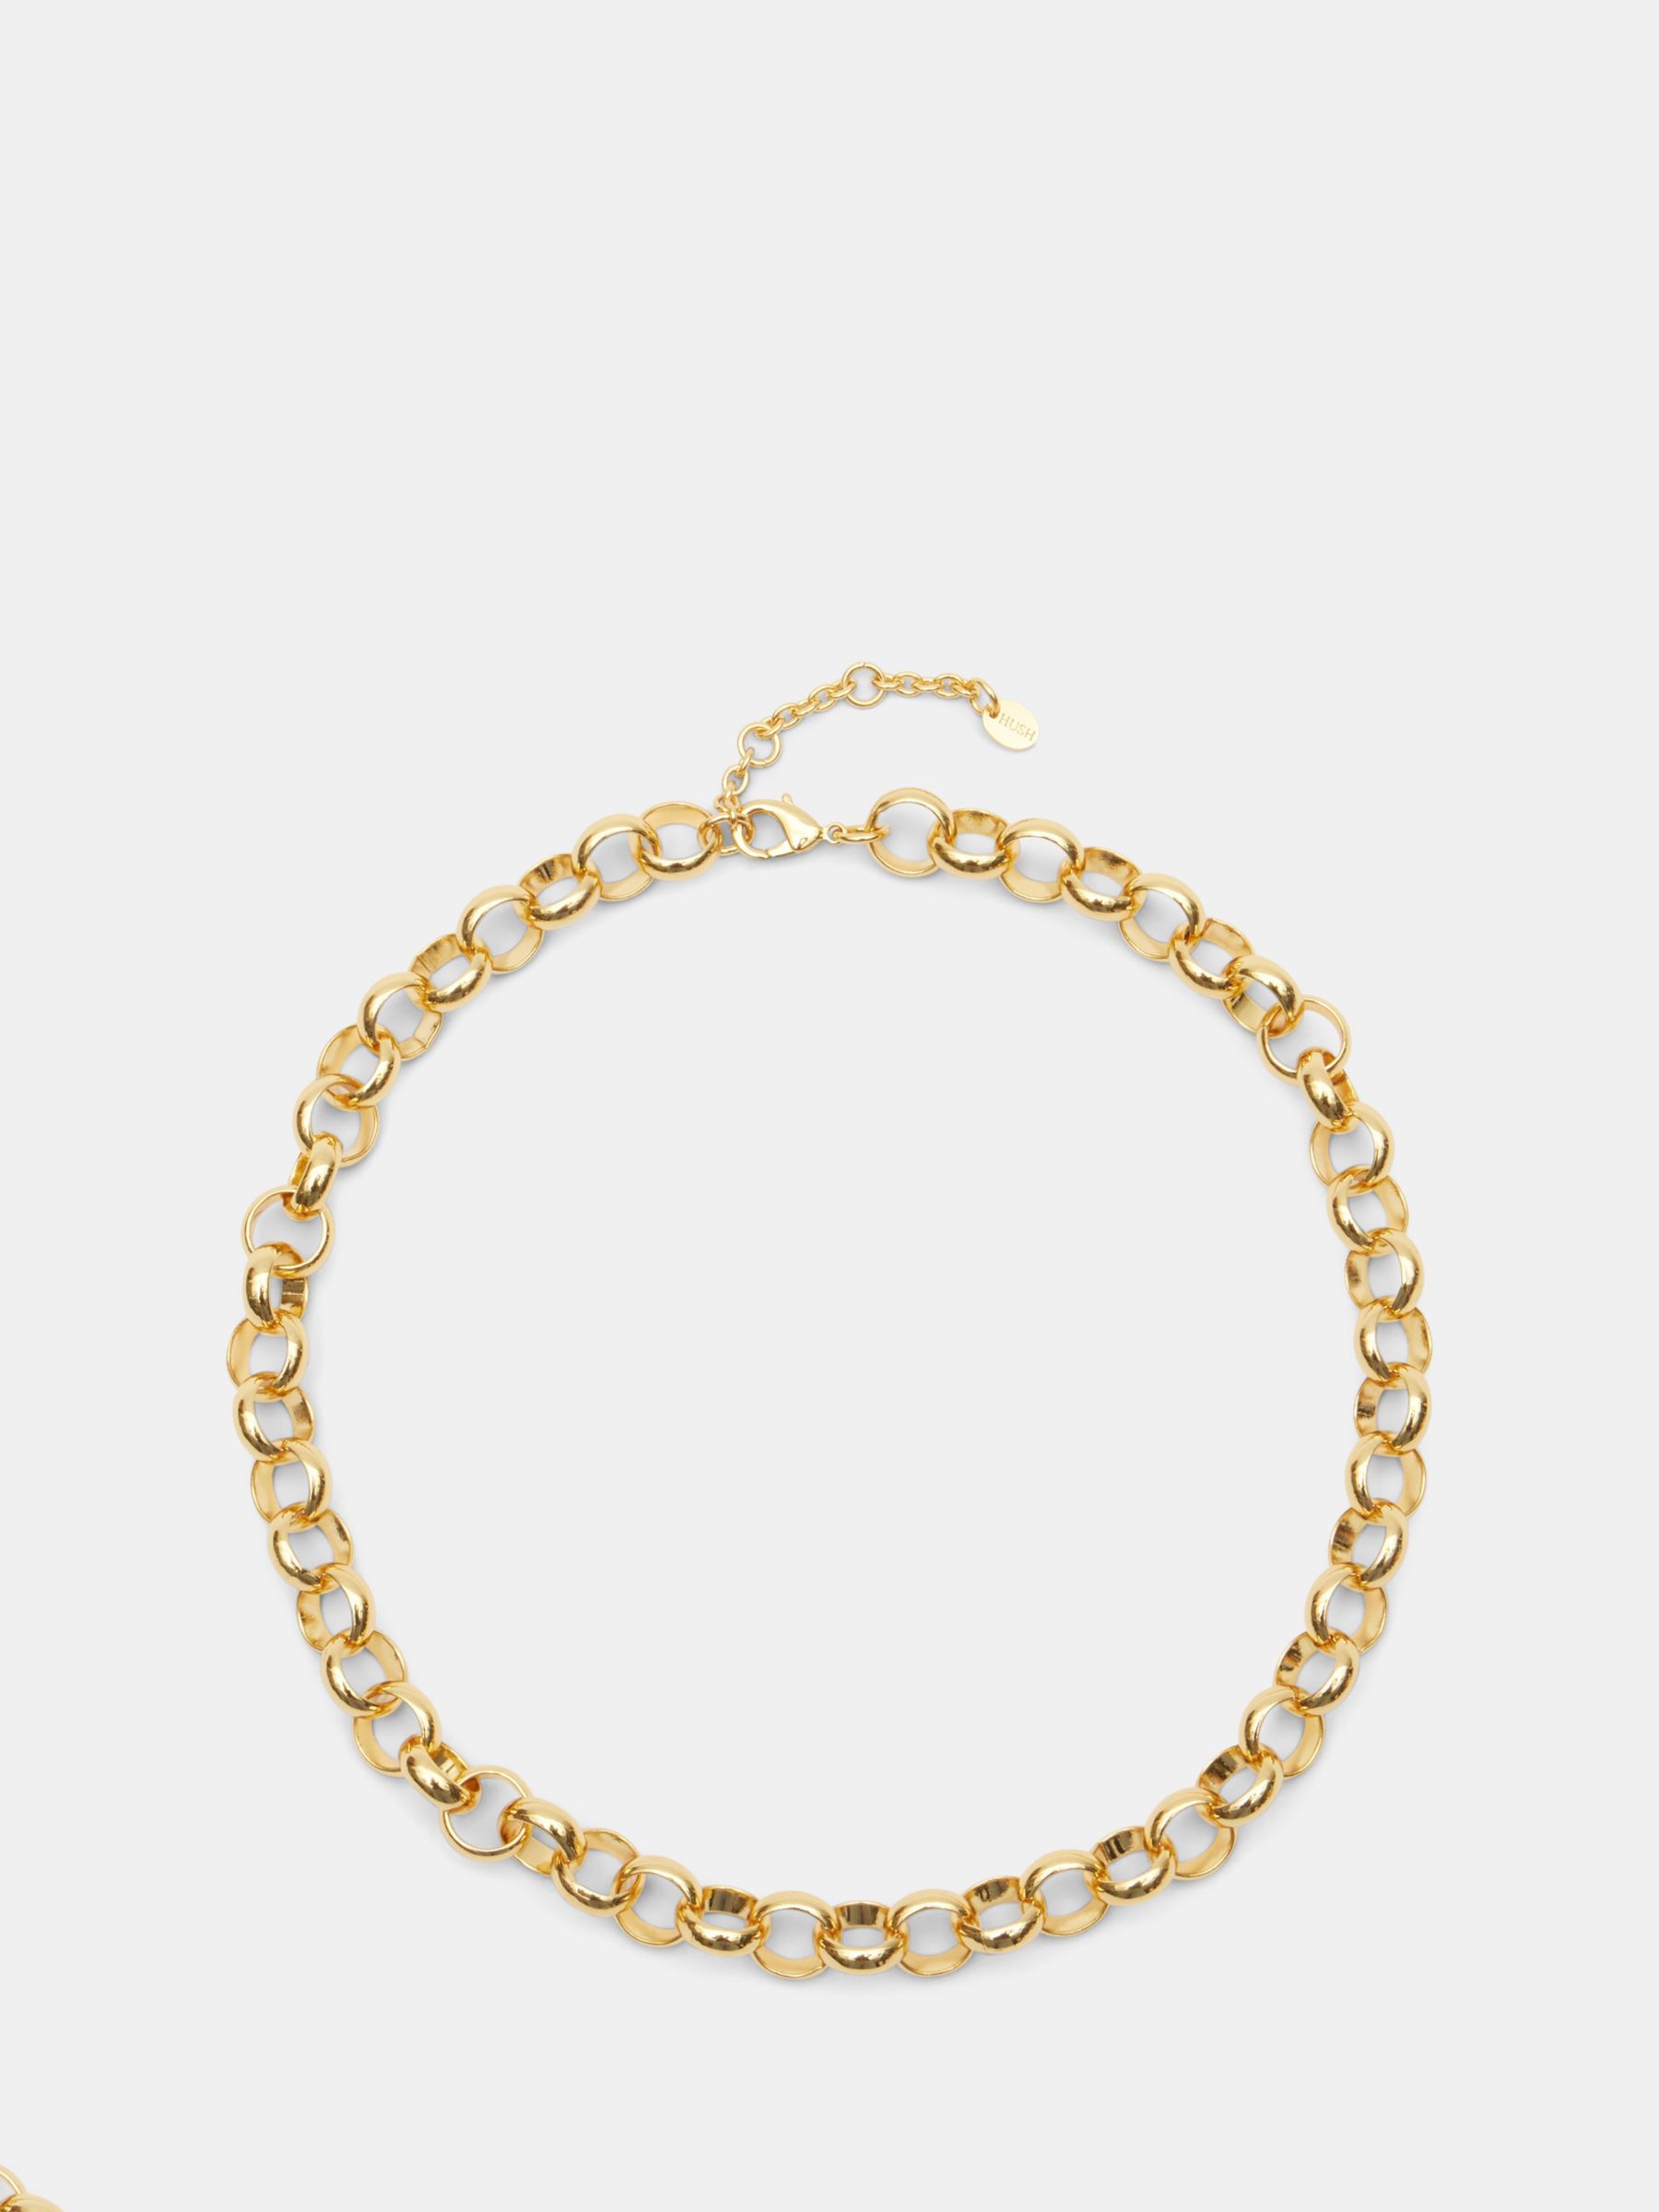 HUSH Harper Chunky Chain Necklace, Gold at John Lewis & Partners